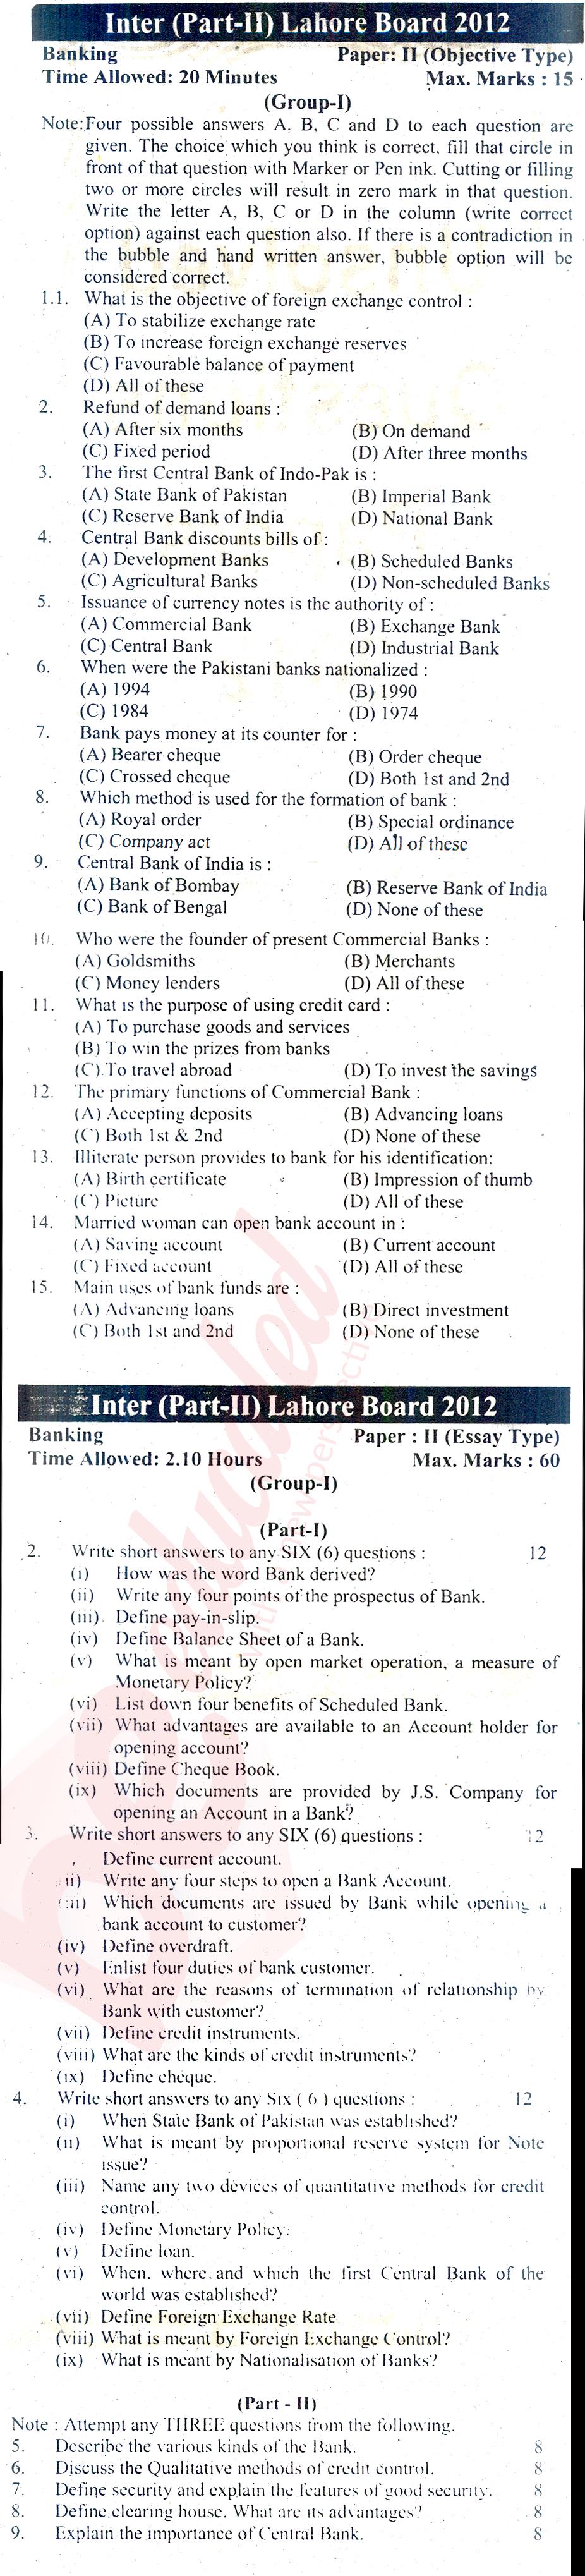 Principles of Banking ICOM Part 2 Past Paper Group 1 BISE Lahore 2012